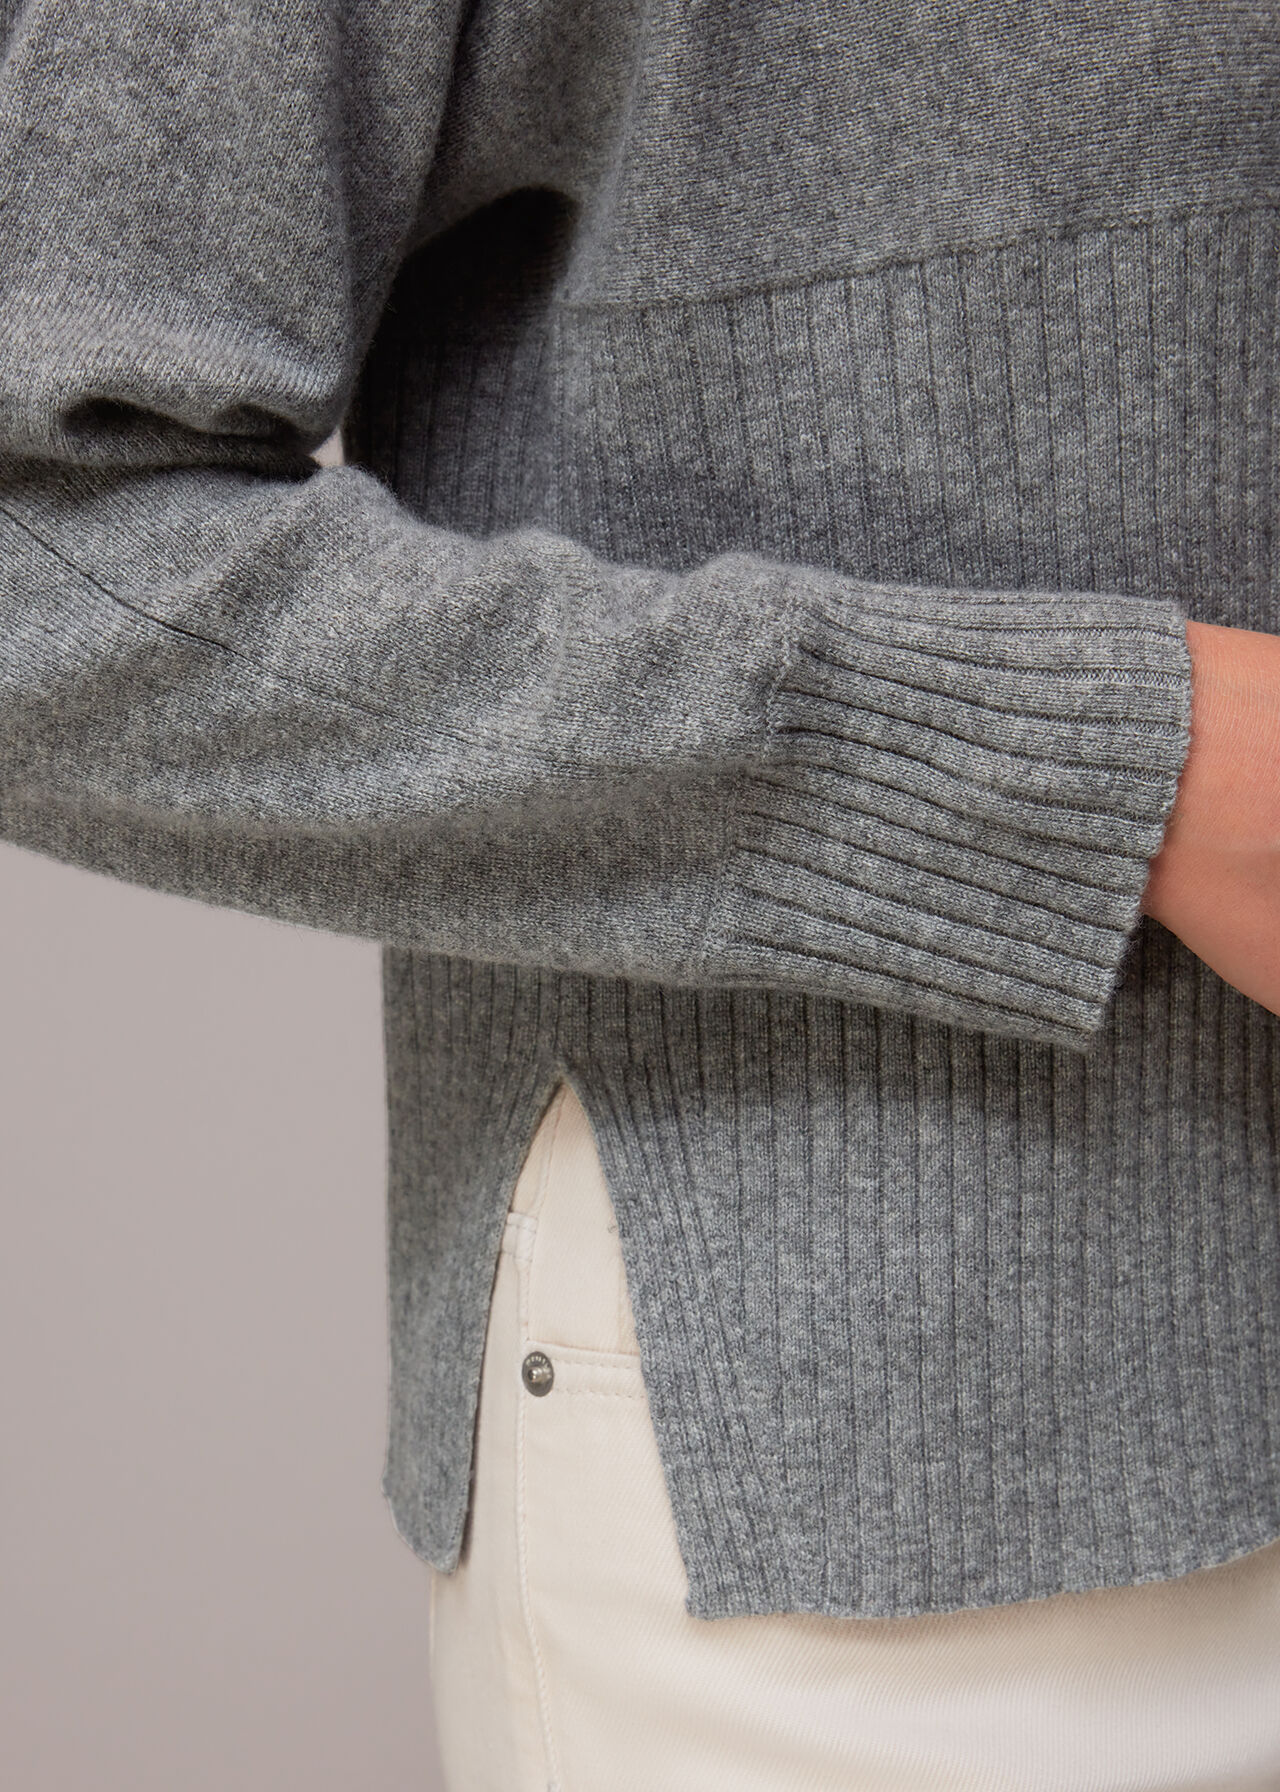 Ribbed Panel Cashmere Sweater